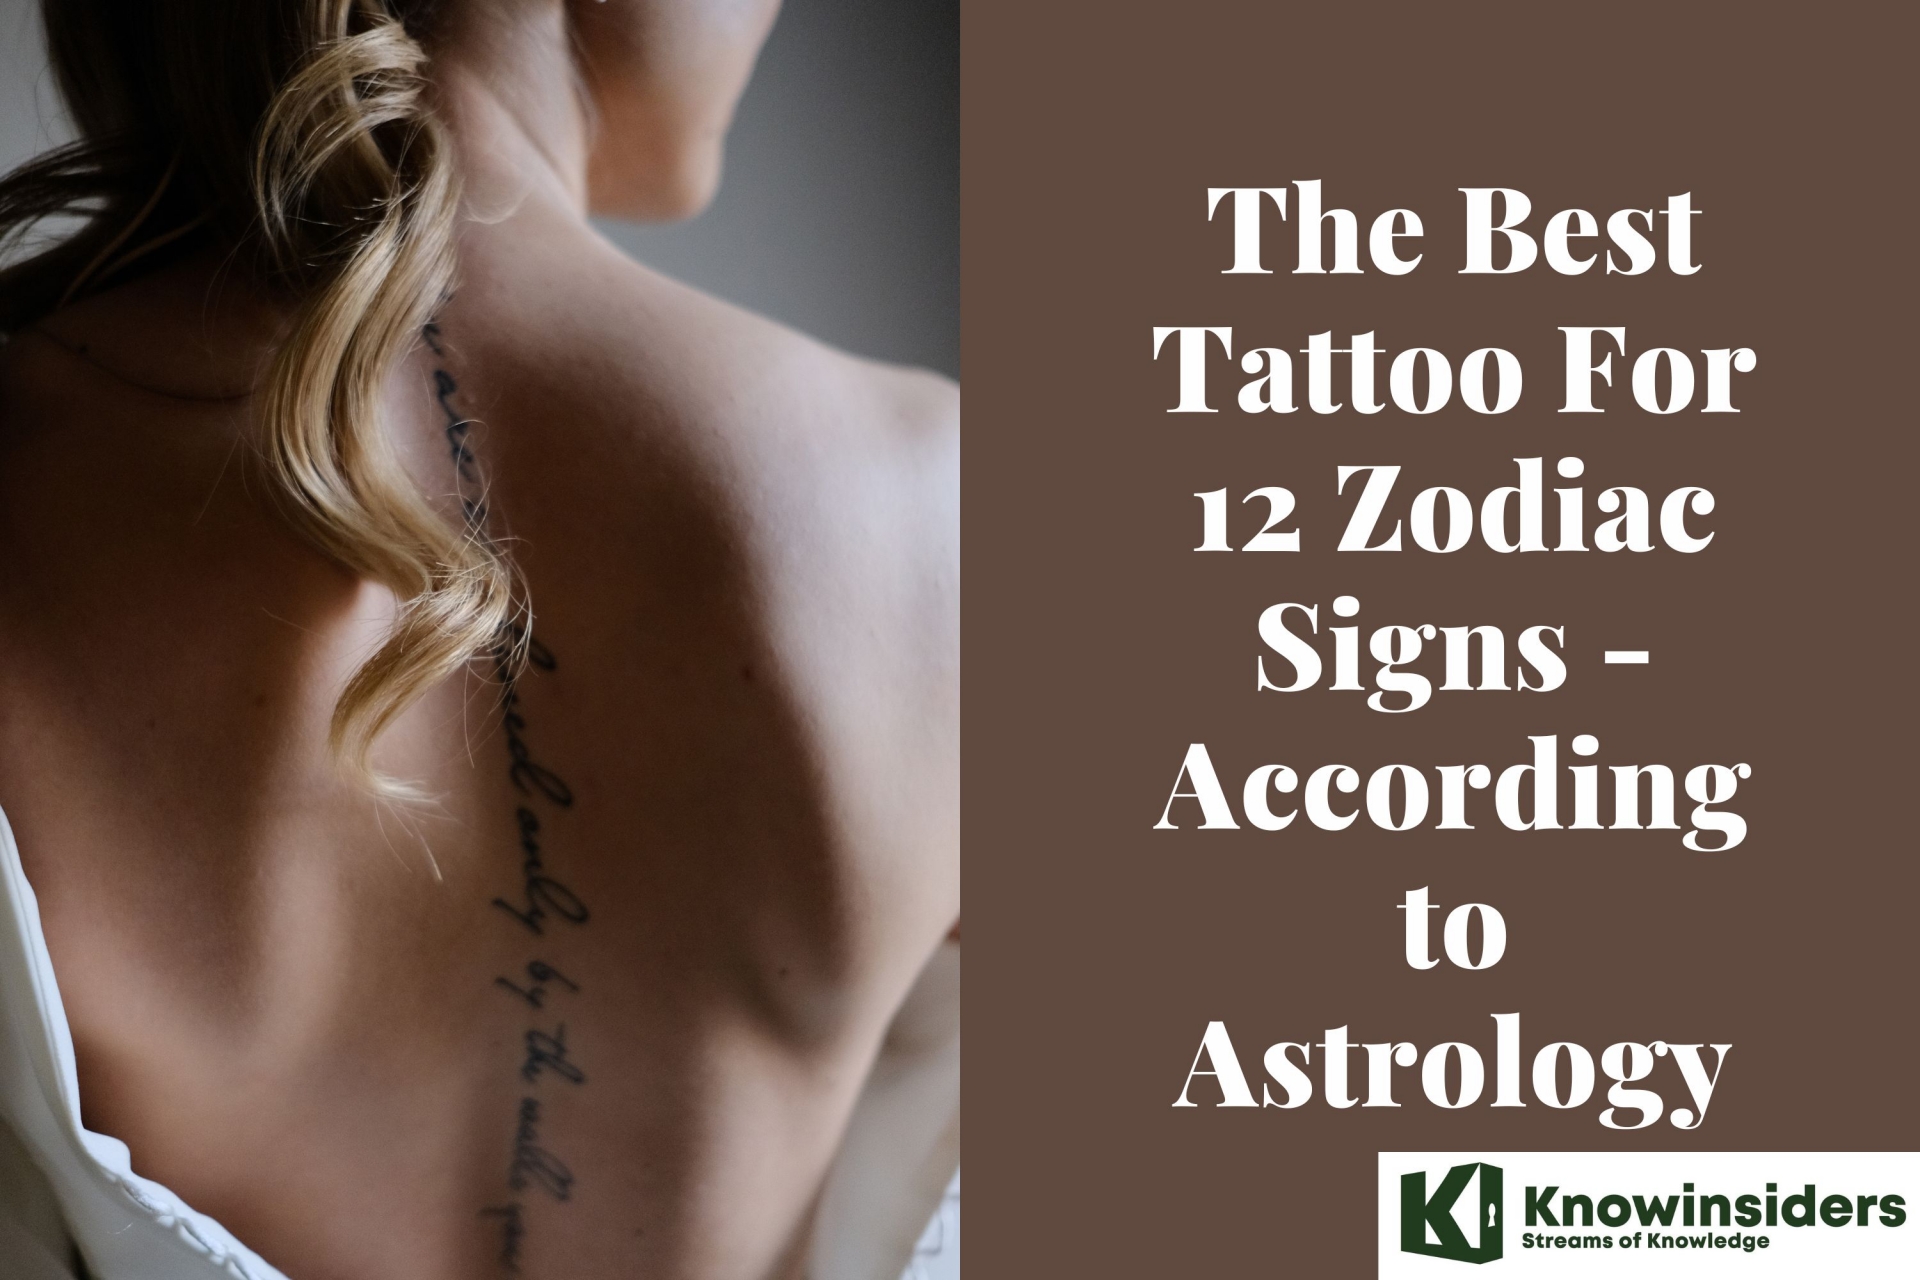 The Best Tattoo For Your Zodiac Sign - Astrology Consultation